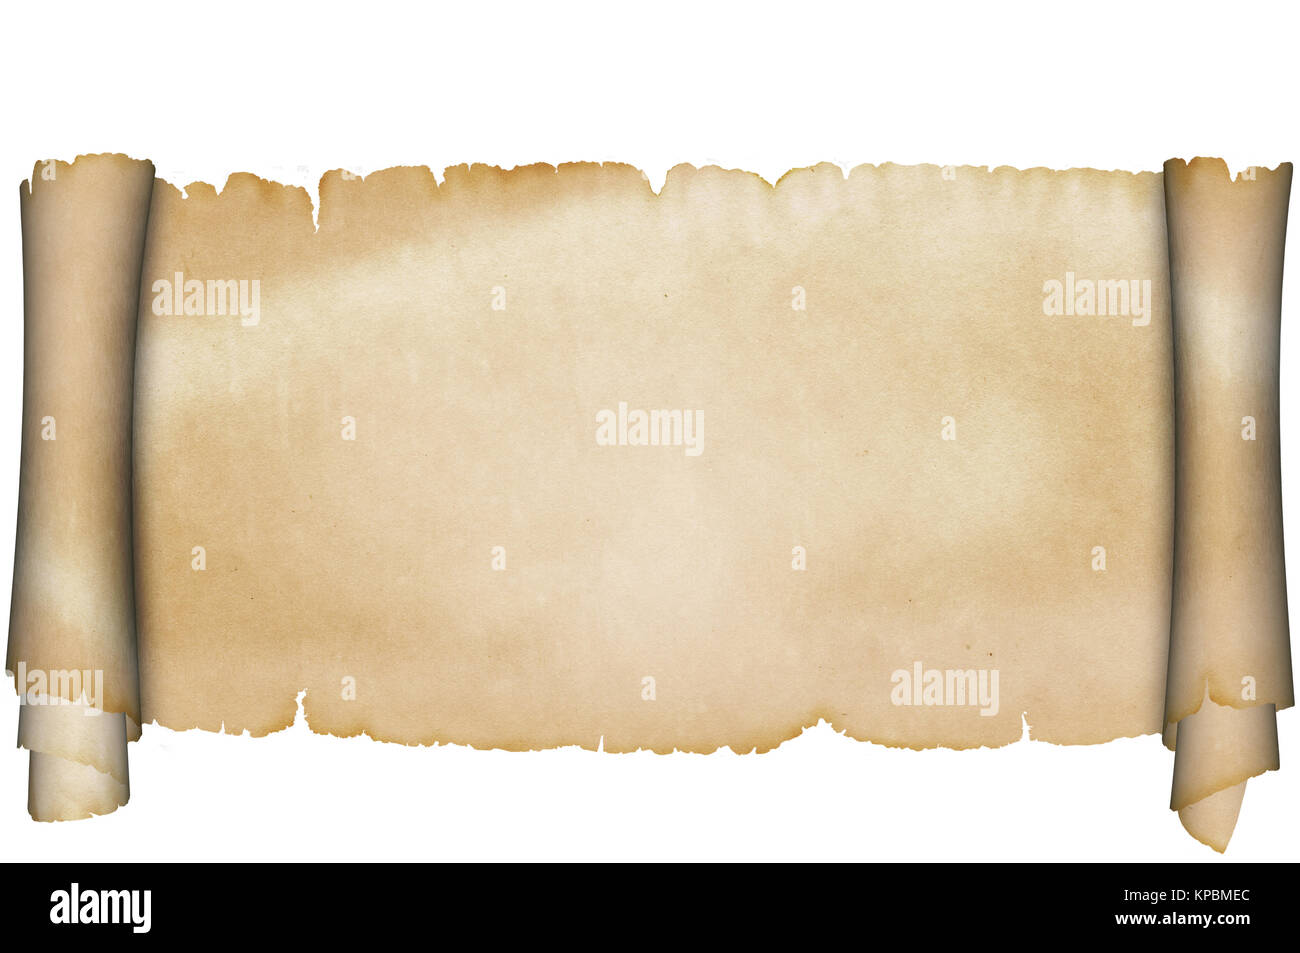 Ancient scroll of parchment isolated on white background. Natural old paper material. Stock Photo